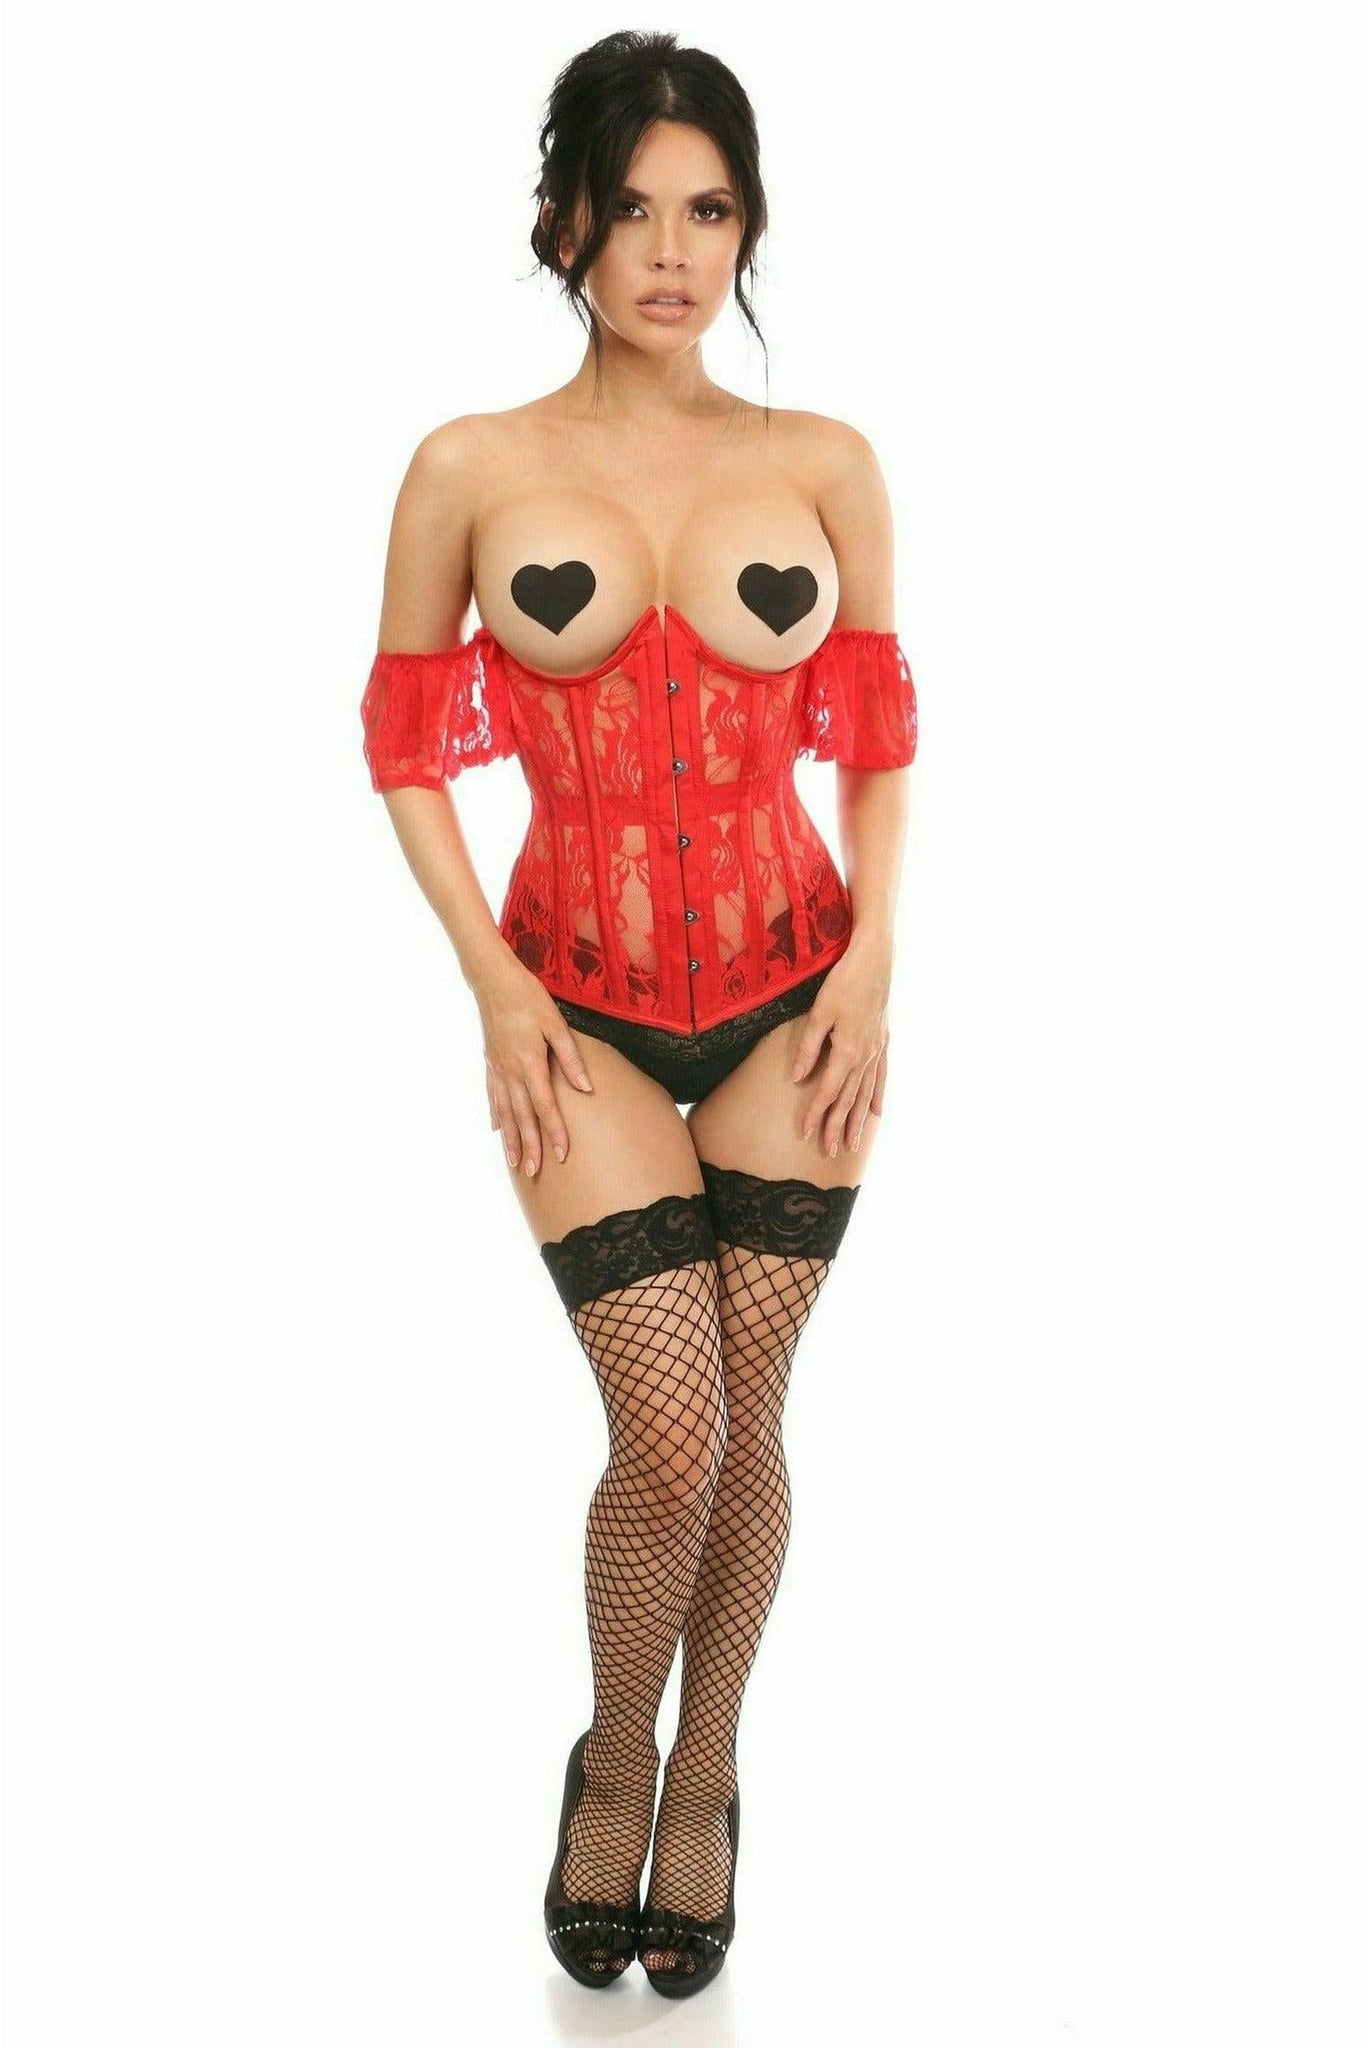 Lavish Sheer Red Lace Underbust Underwire Corset with Ruffle Sleeve by Daisy Corsets in Size S, M, L, XL, 2X, 3X, 4X, 5X, or 6X